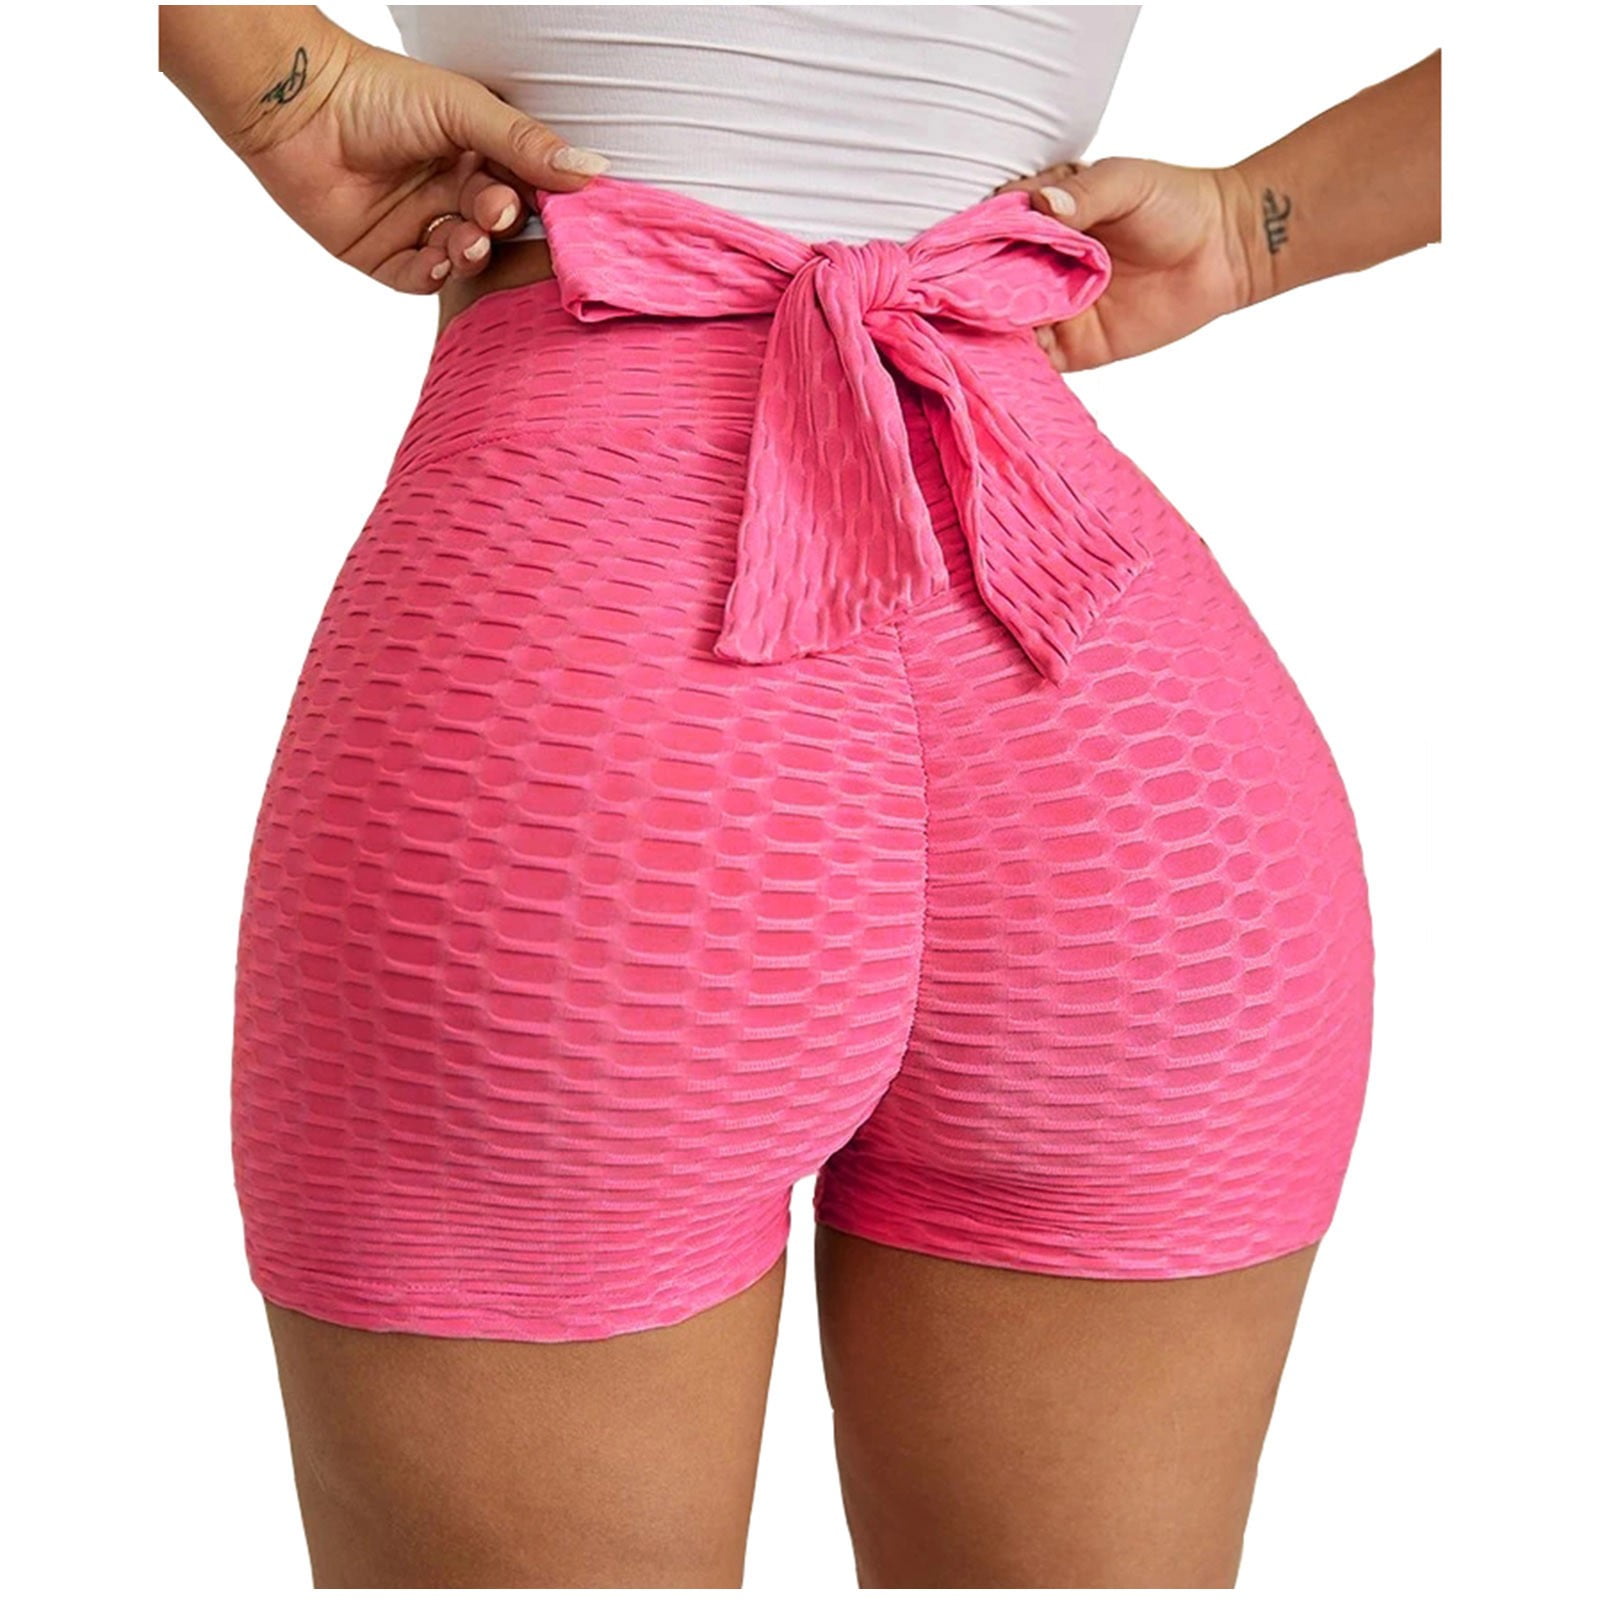 xinqinghao shapewear shorts shorts polyester bow tie home woman lounge pants  hot pink xl 